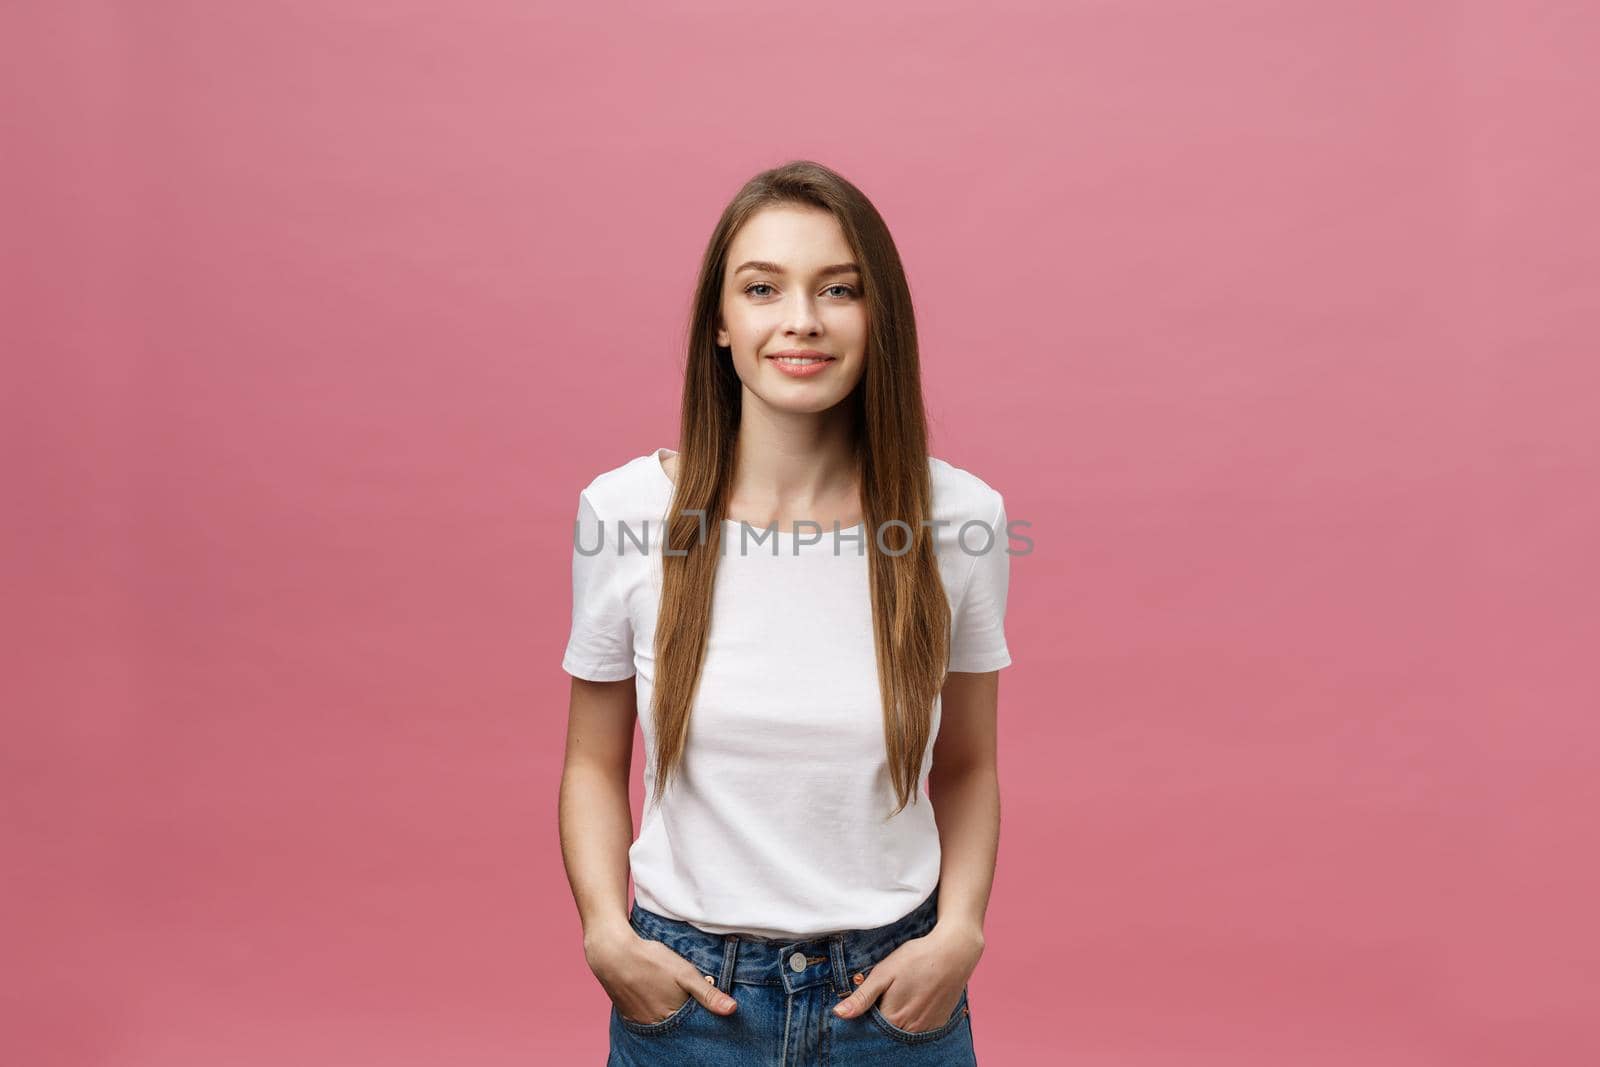 Surprised happy beautiful woman looking in excitement. Isolate over pink background and copy space